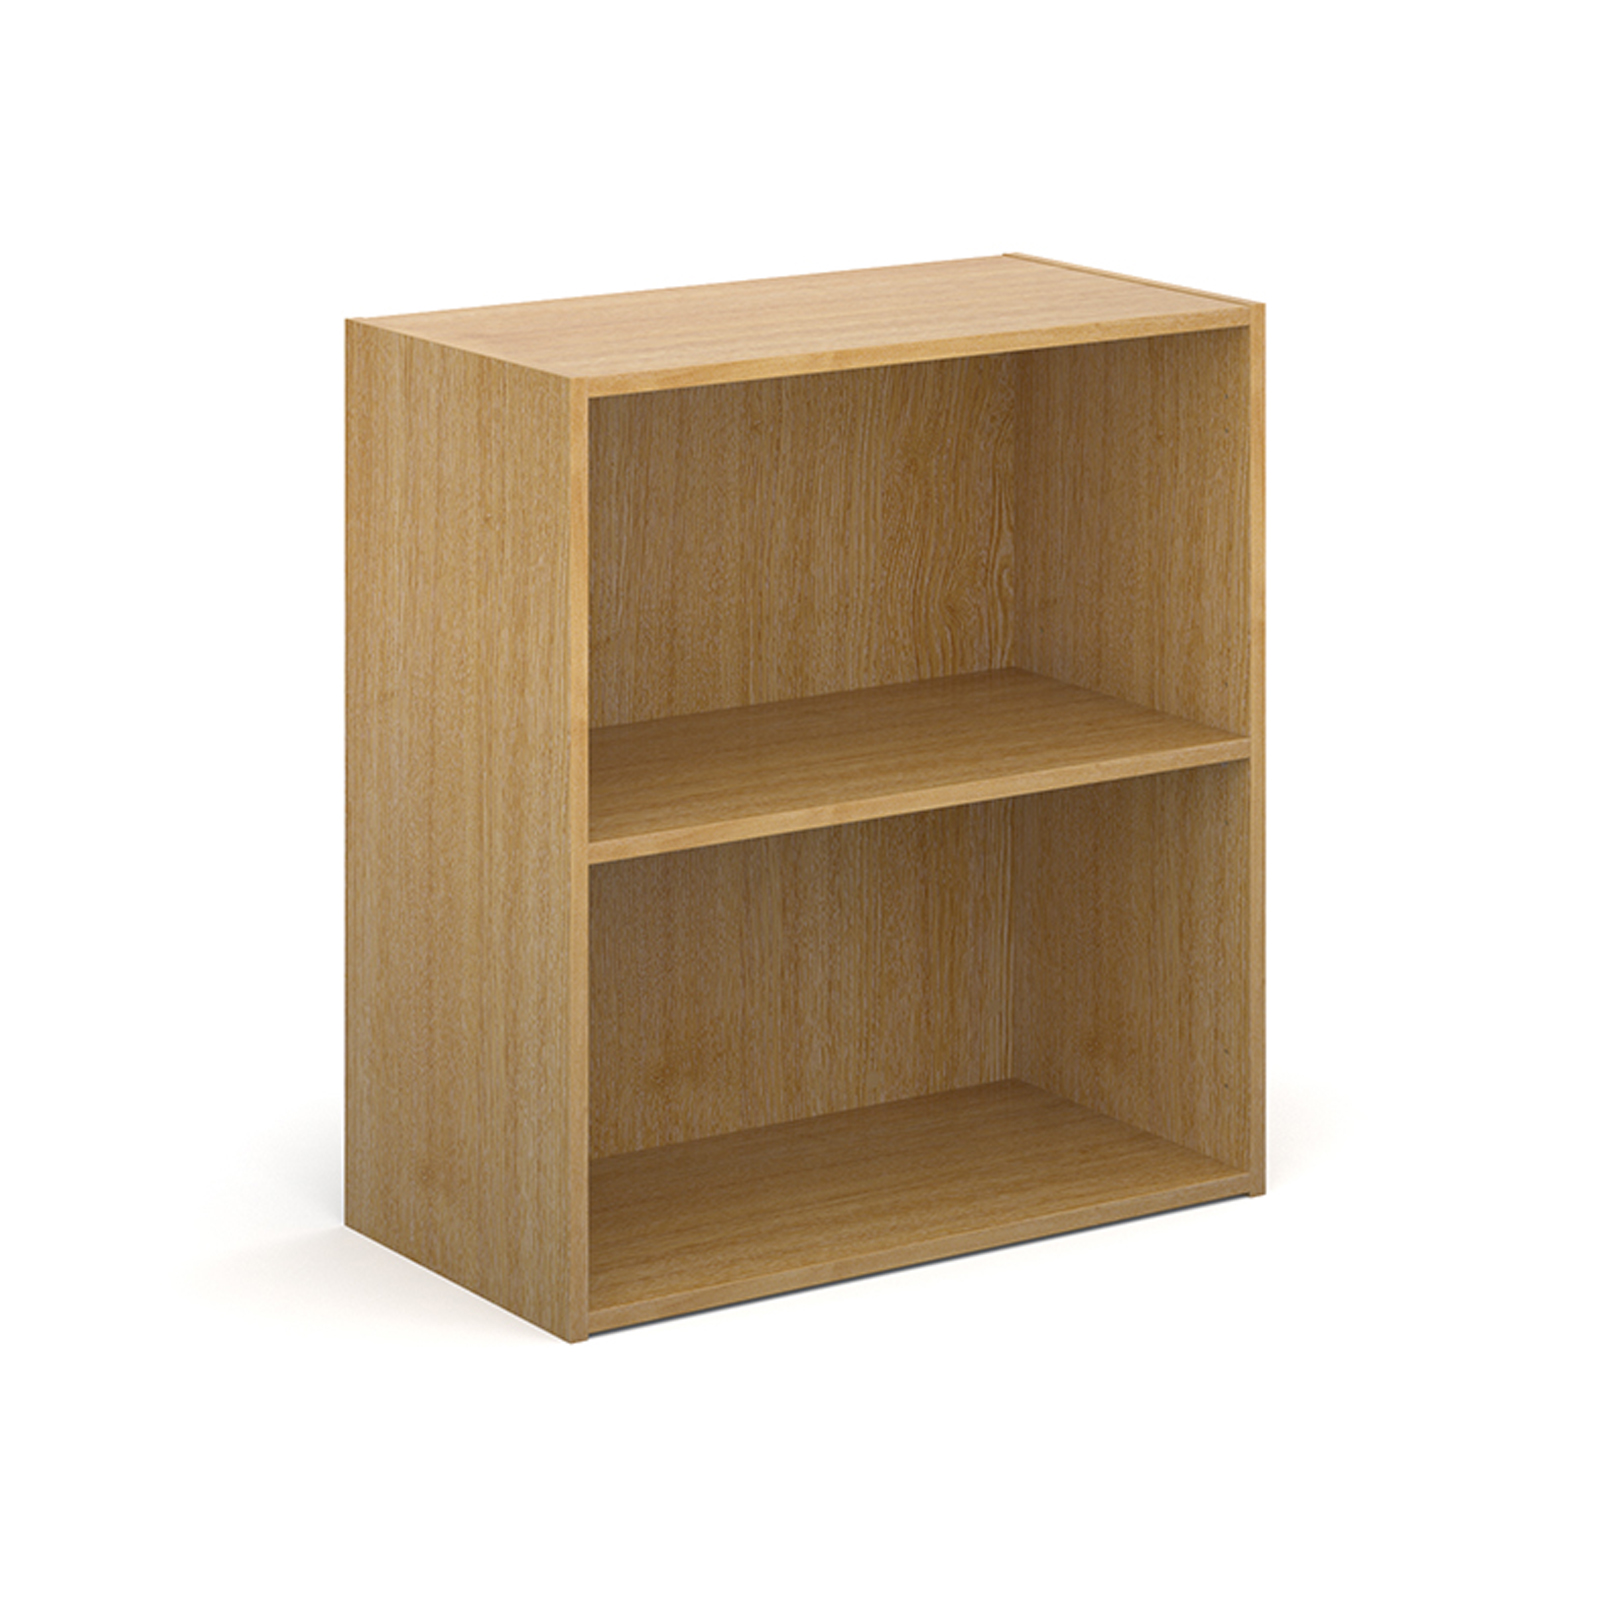 Up To 1200mm High Contract bookcase 830mm high with 1 shelf - oak